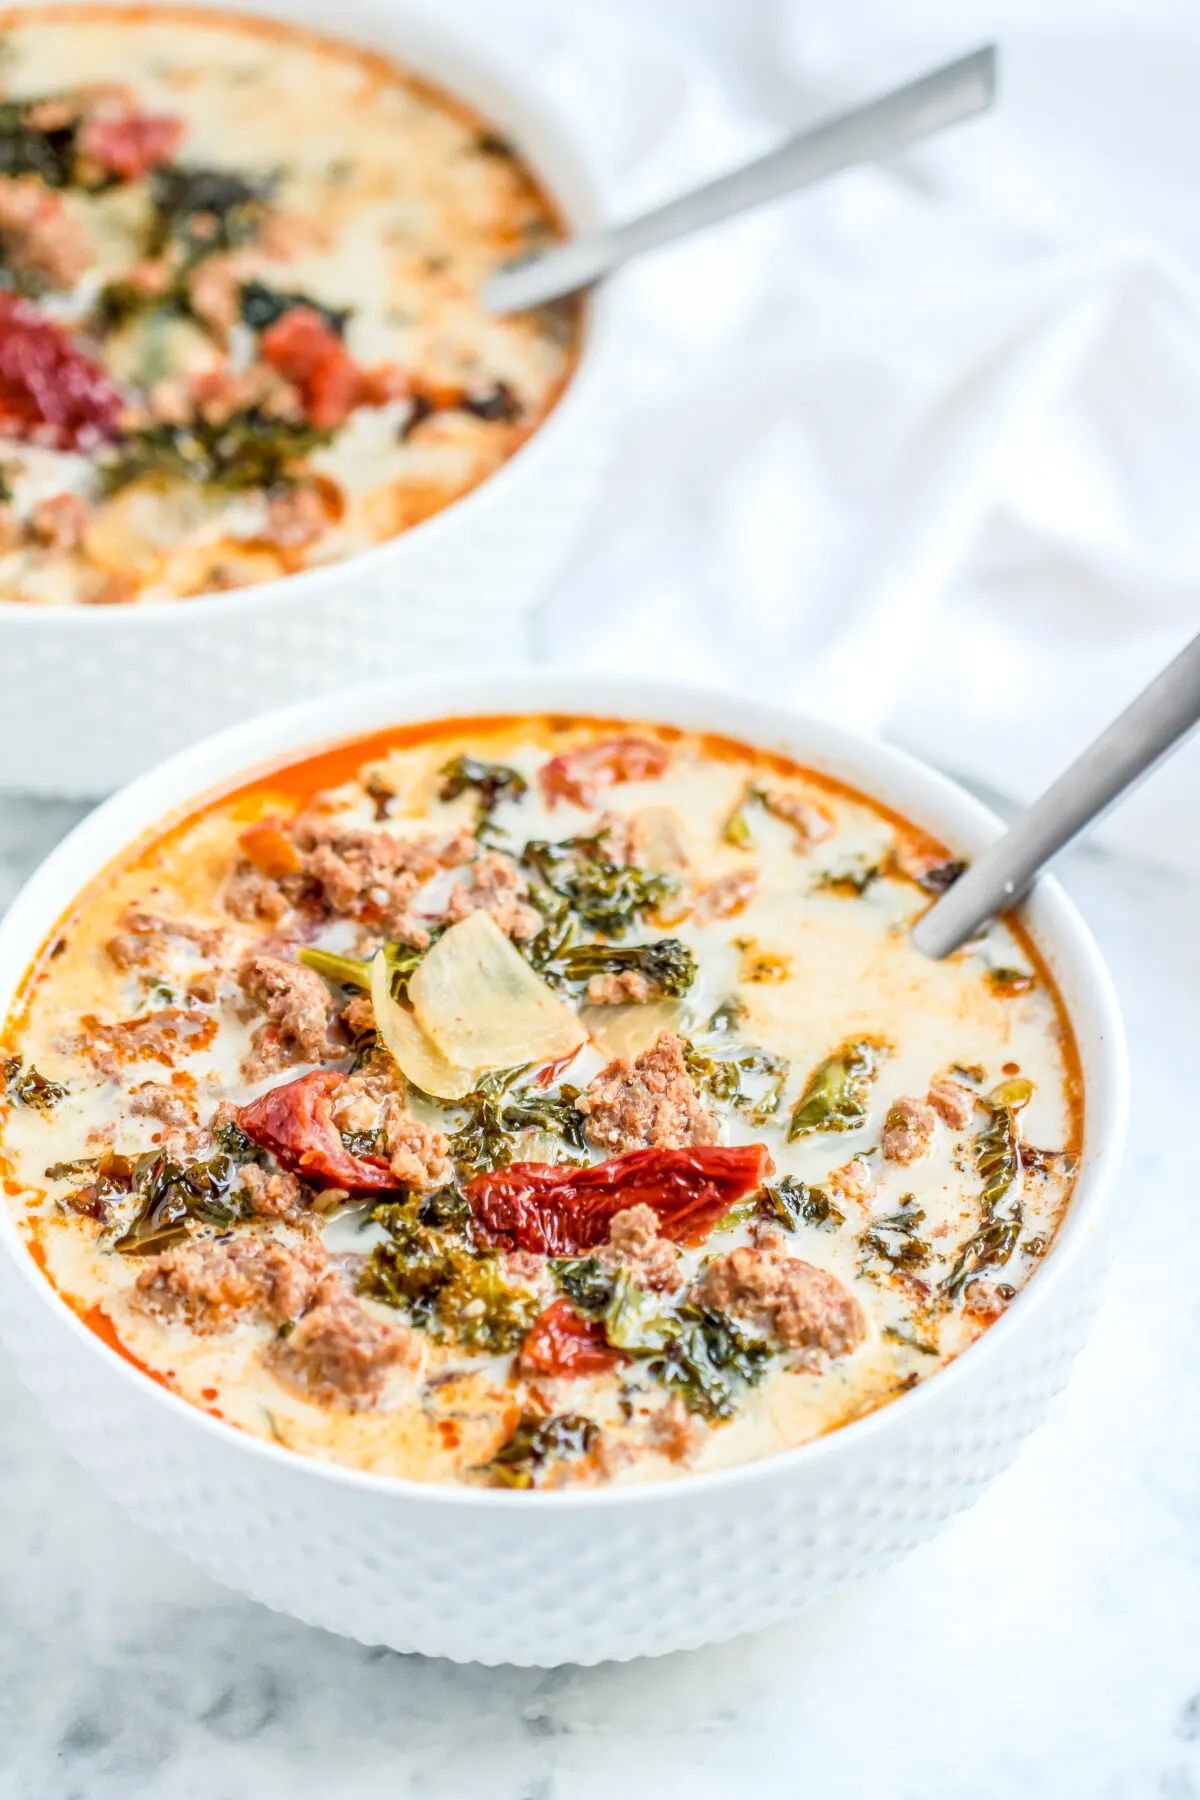 This Keto Tuscan soup recipe is a low carb take on the classic zuppa toscana. It's hearty, creamy, full of flavour and made in just one-pot!